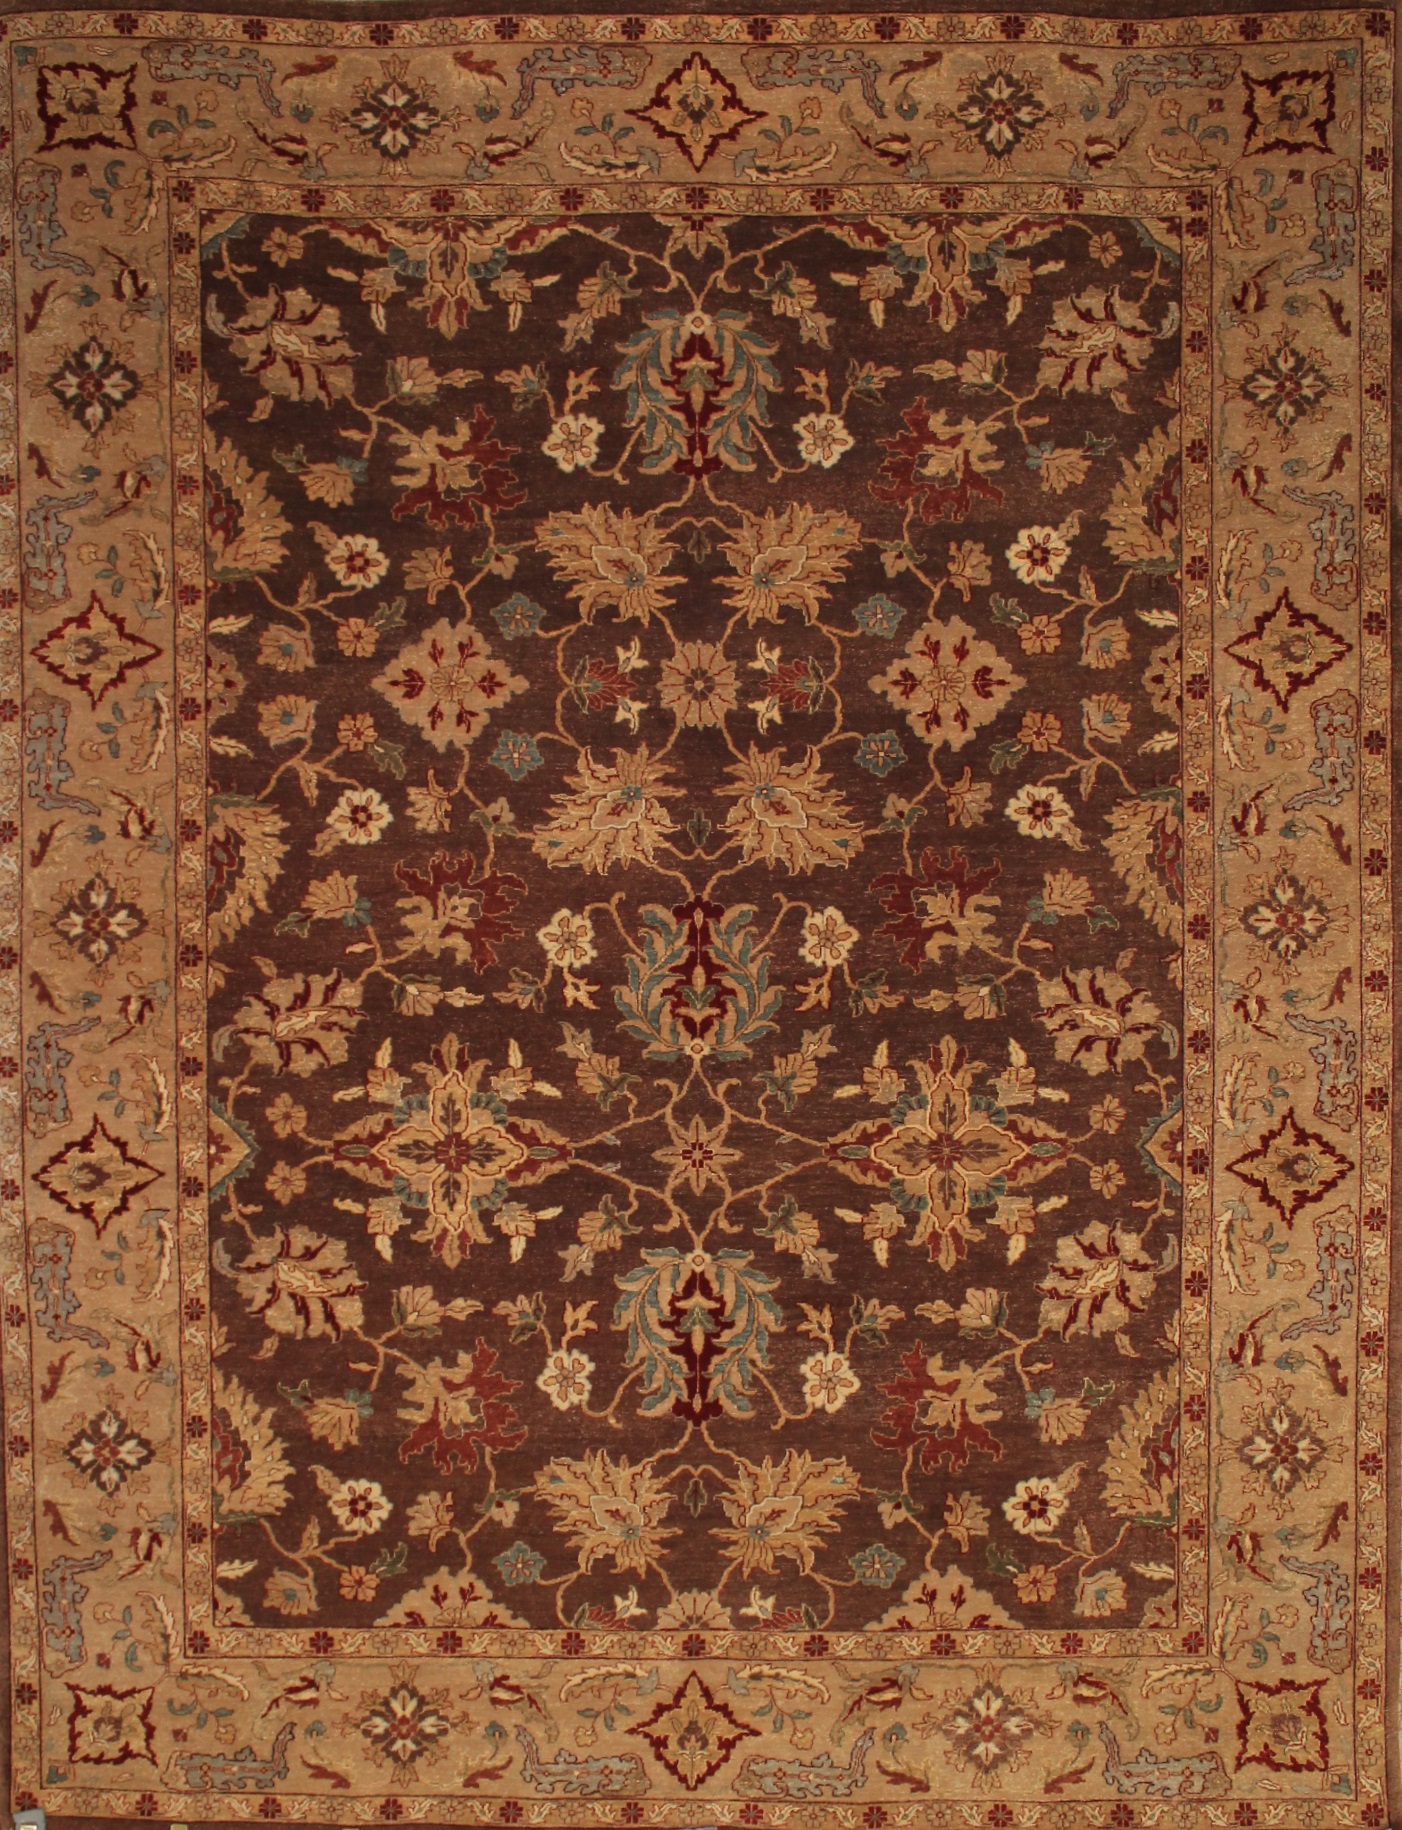 Clearance & Discount Rugs Zeigler Style Hand Knotted Wool Rug  9609 Lt. Brown - Chocolate & Lt. Gold - Gold Hand Knotted Rug